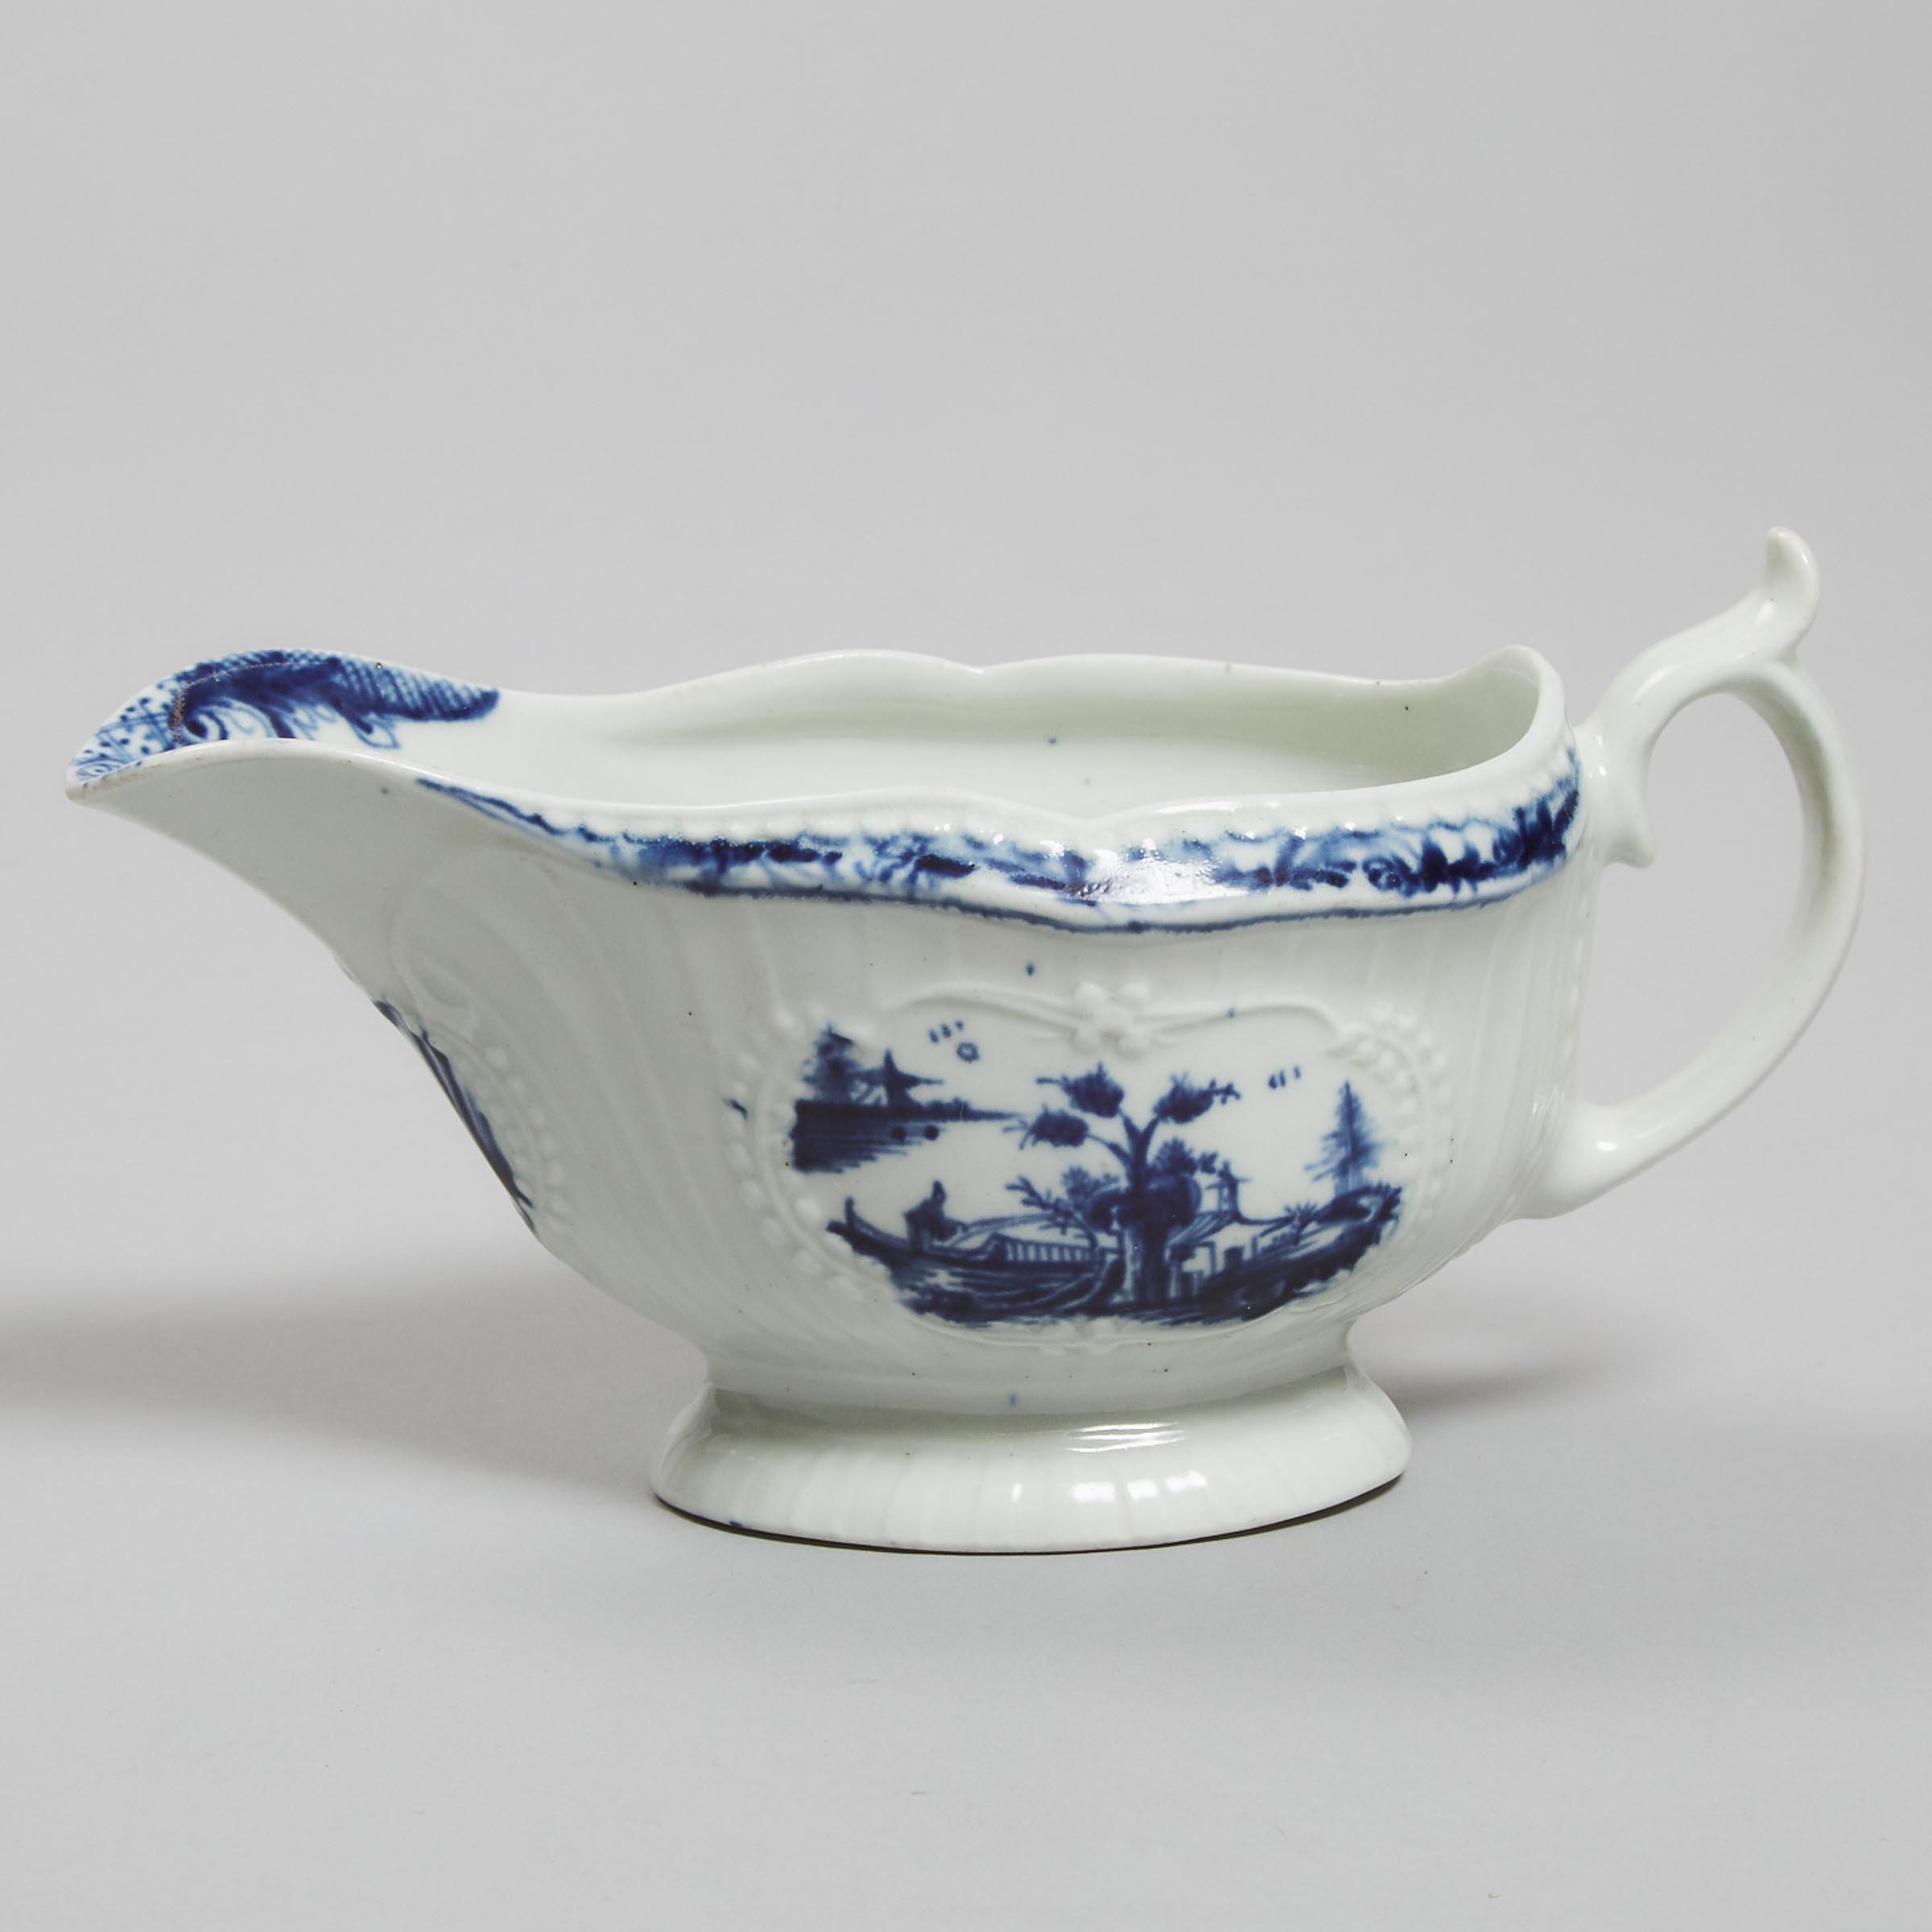 Worcester 'Fisherman and Billboard Island' Moulded Sauce Boat, c.1758-65